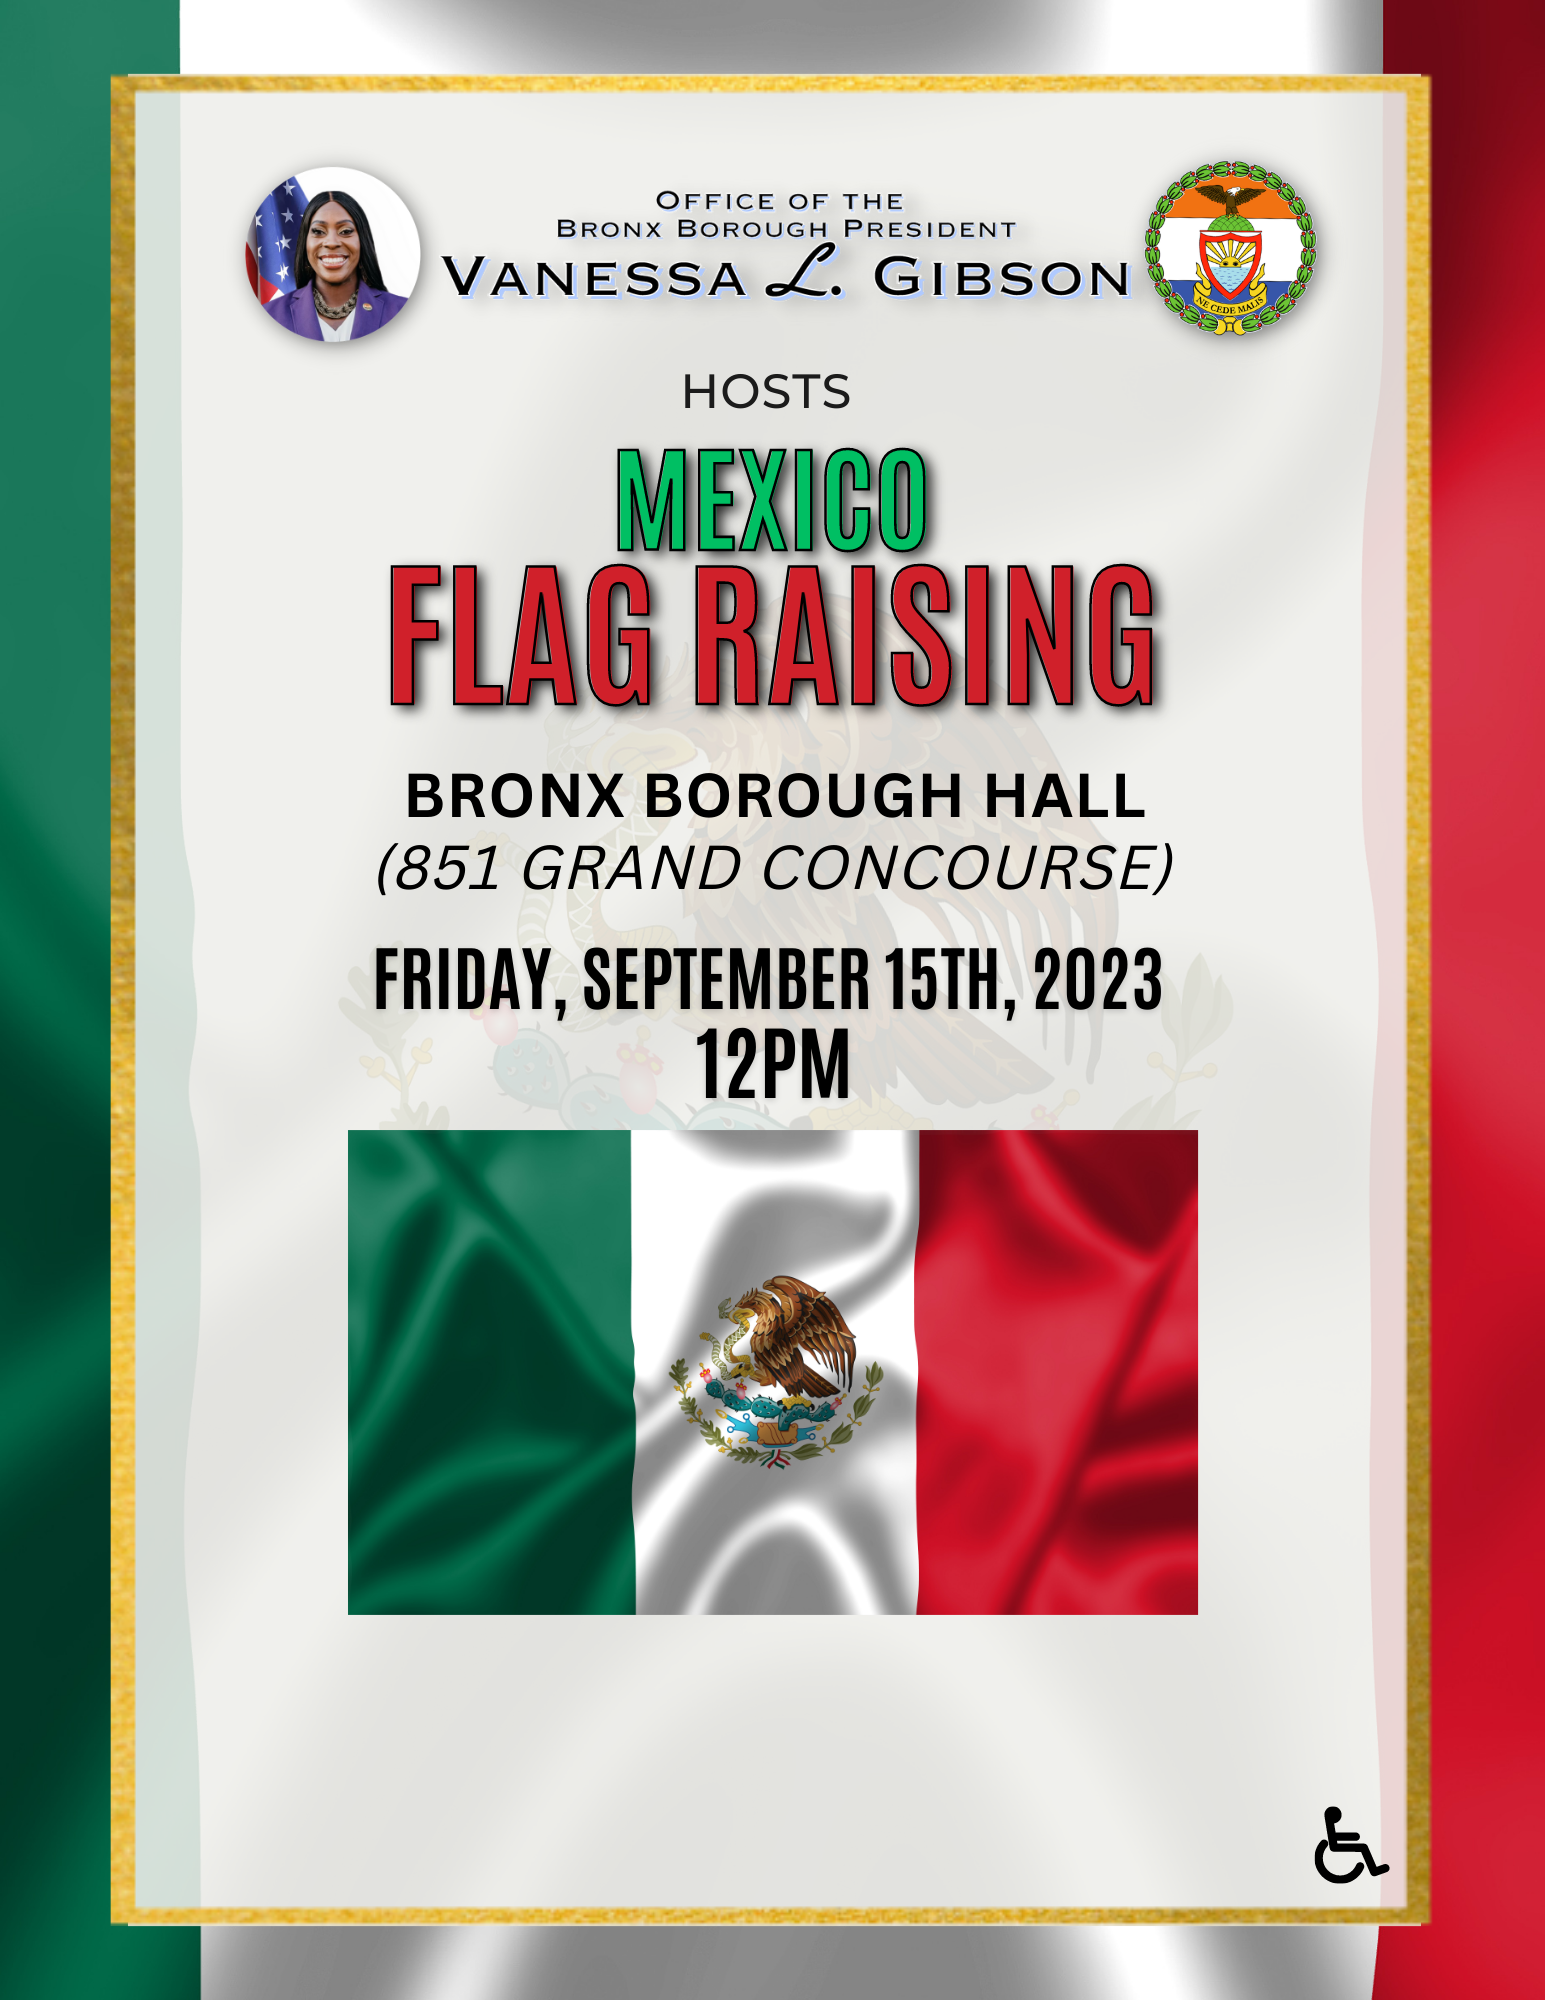 A flyer for the Mexican Flag Raising event on September 15, 2023, at 12 PM.